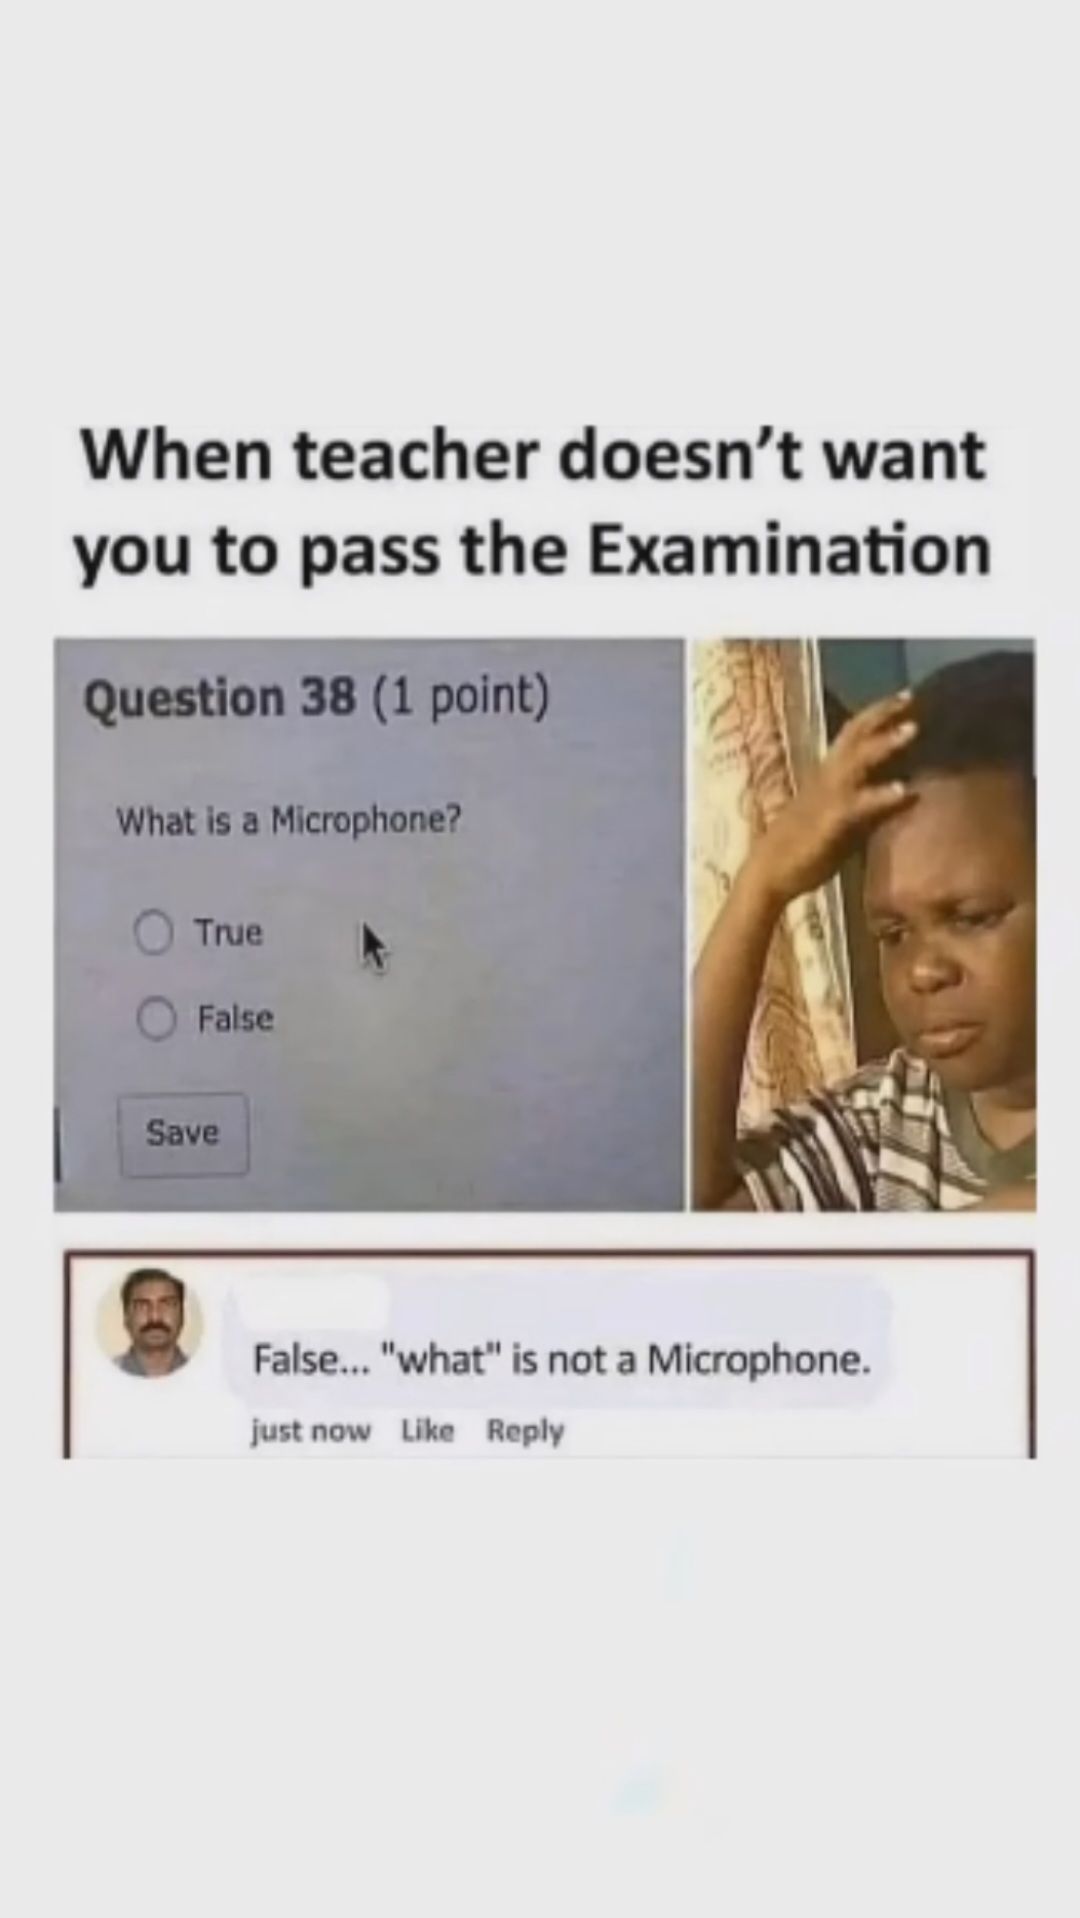 When teacher doesn't want
you to pass the Examination
Question 38 (1 point)
What is a Microphone?
True
False
Save
False... "what" is not a Microphone.
just now Like Reply